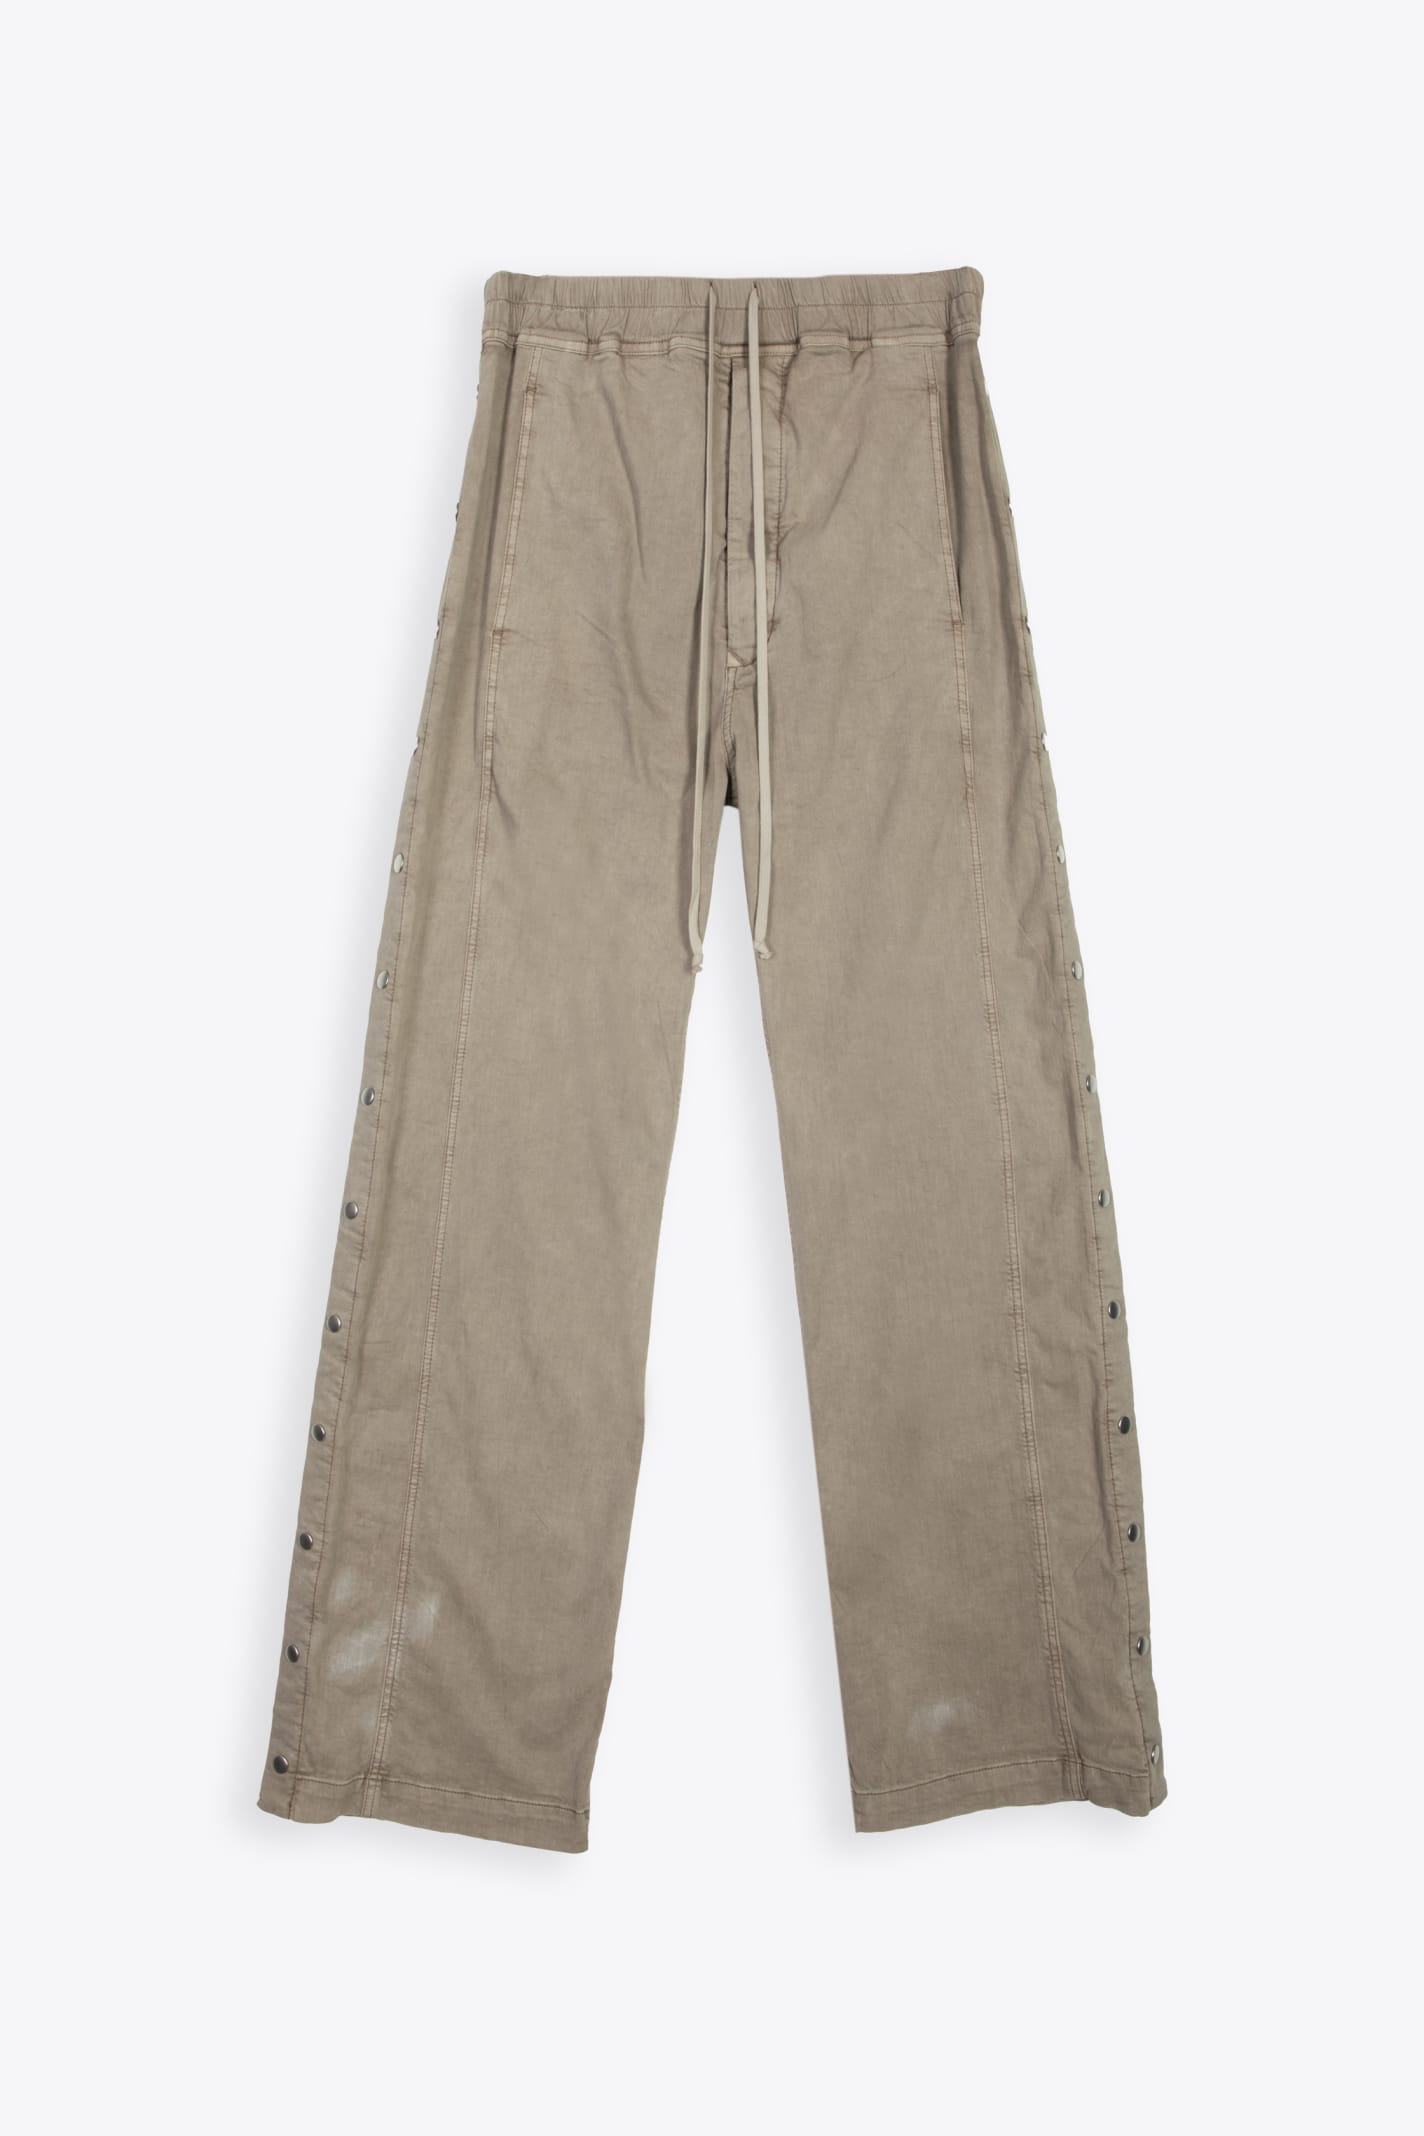 Drkshdw Pusher Pants Pearl Grey Waxed Cotton Pants With Side Snaps - Pusher Pants In Perla